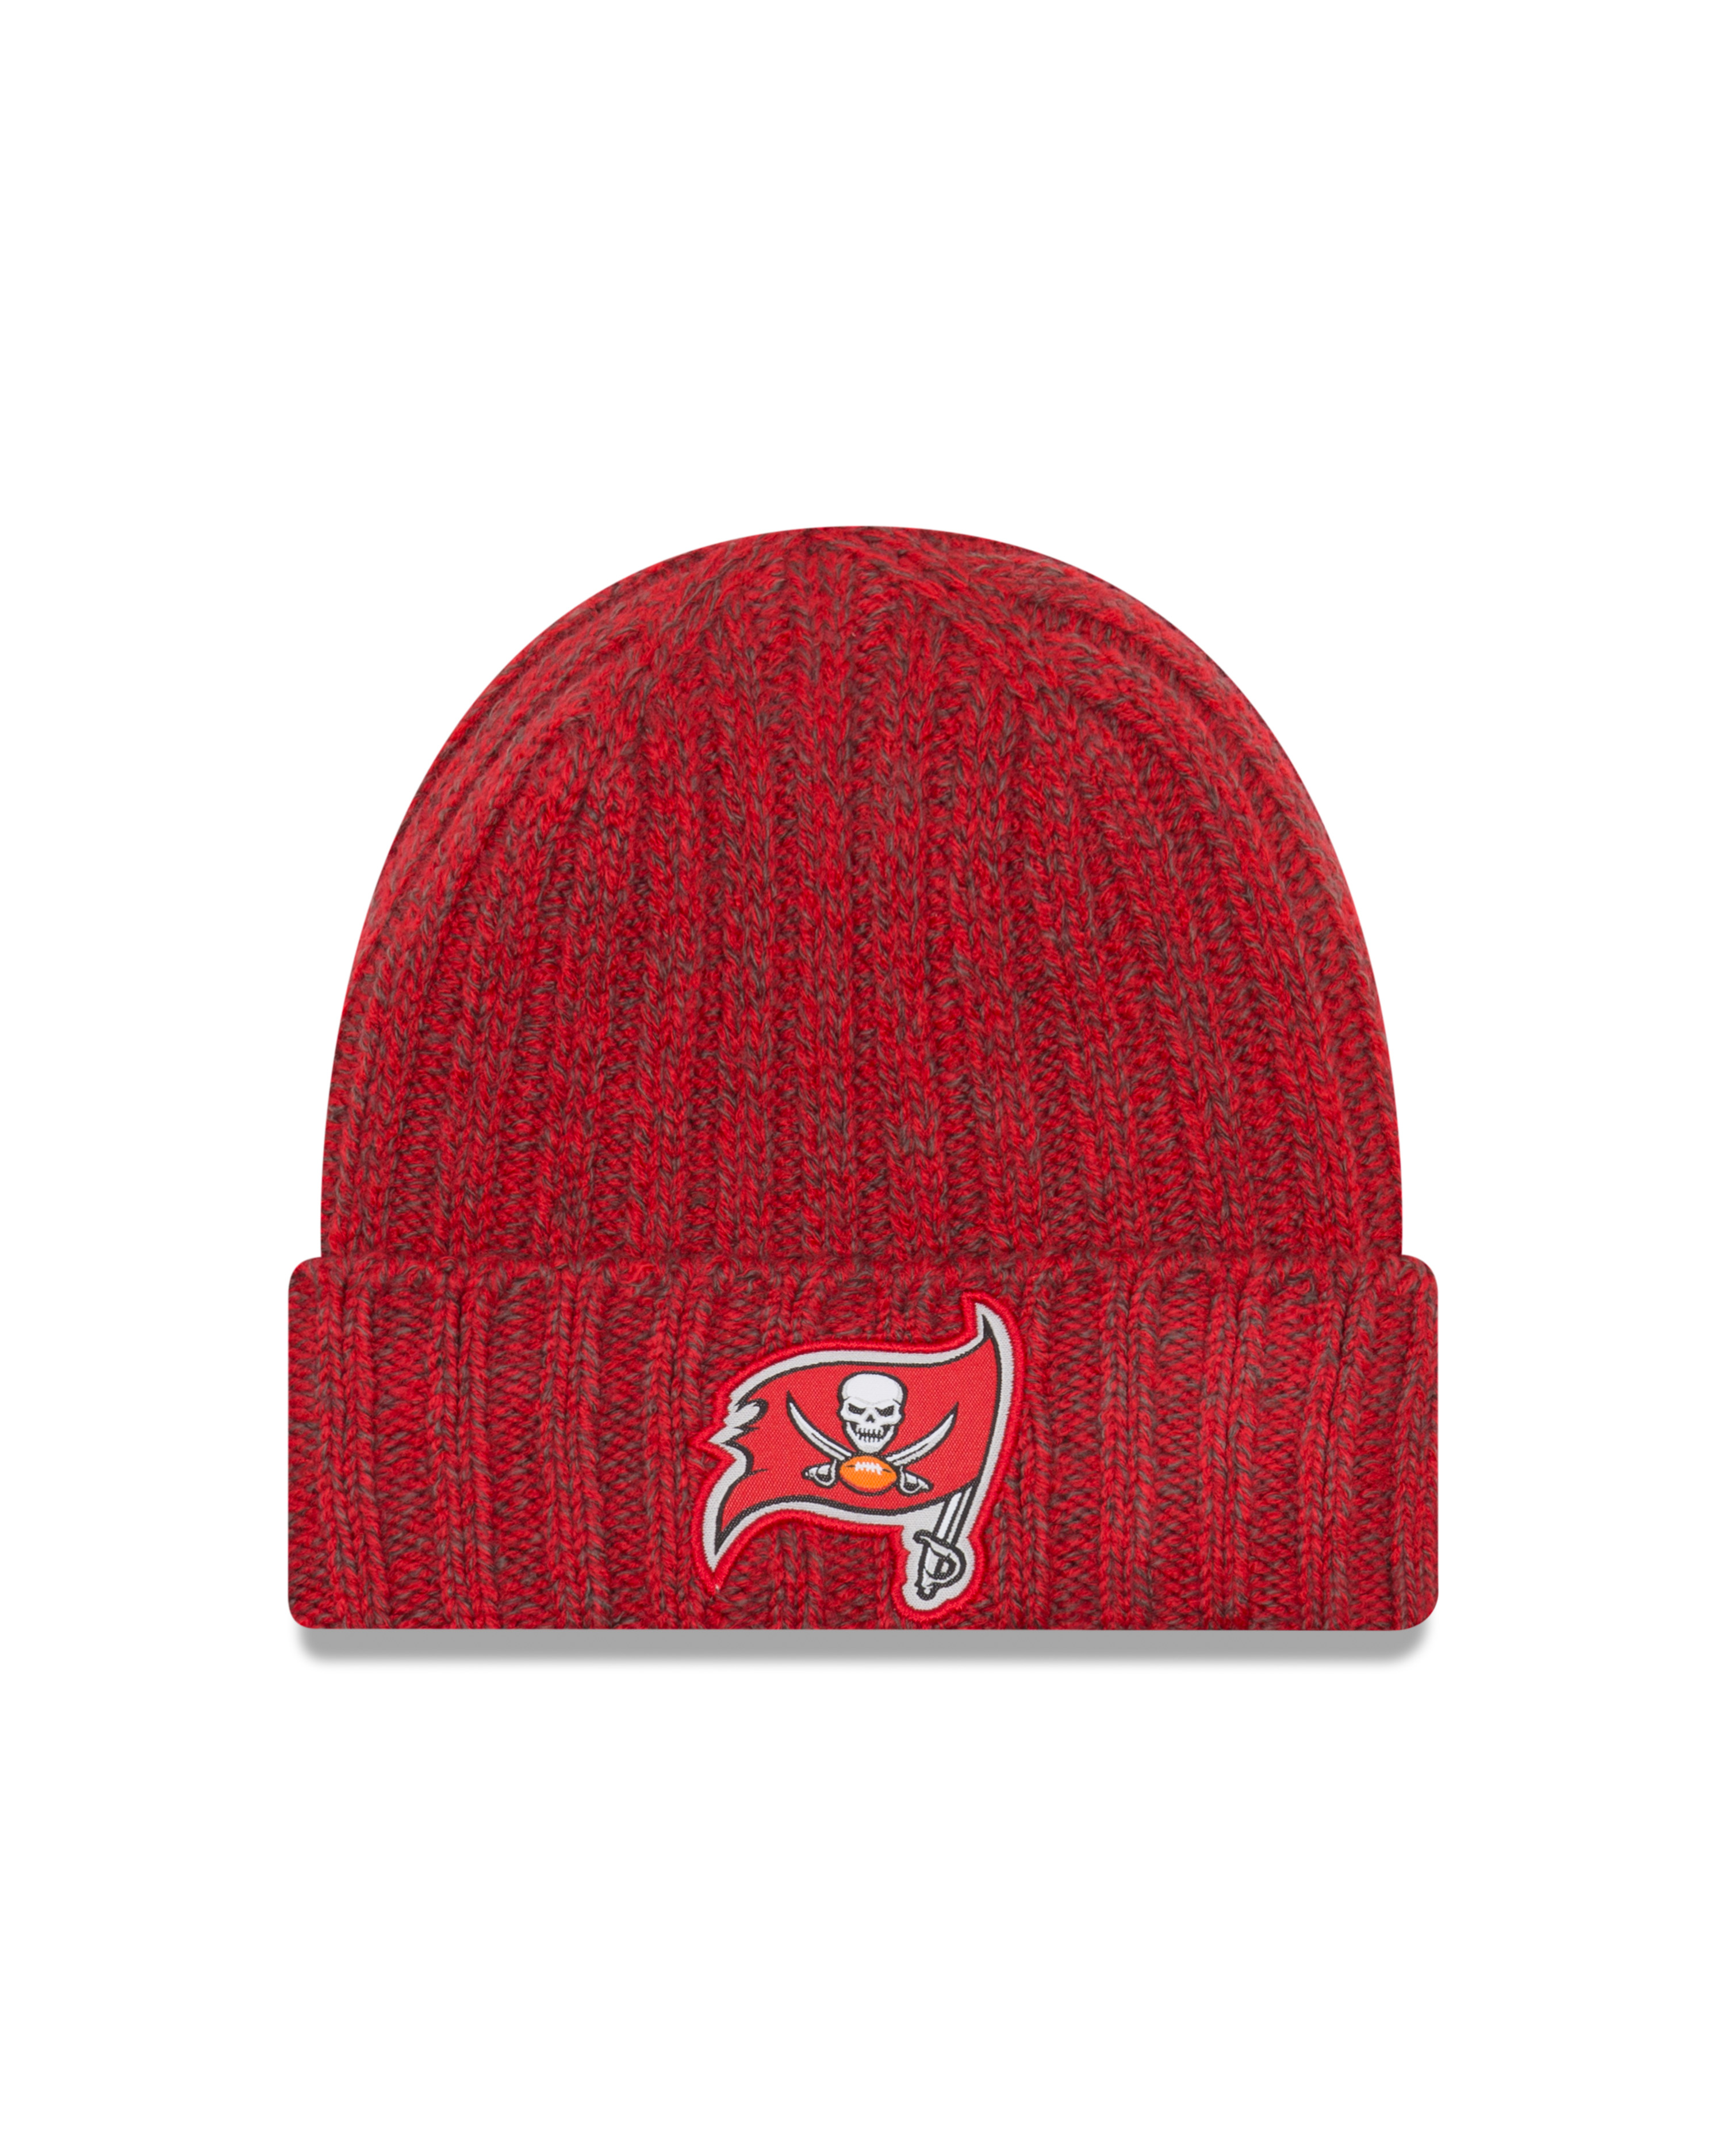 New Era Official NFL Cold Weather Collection #66